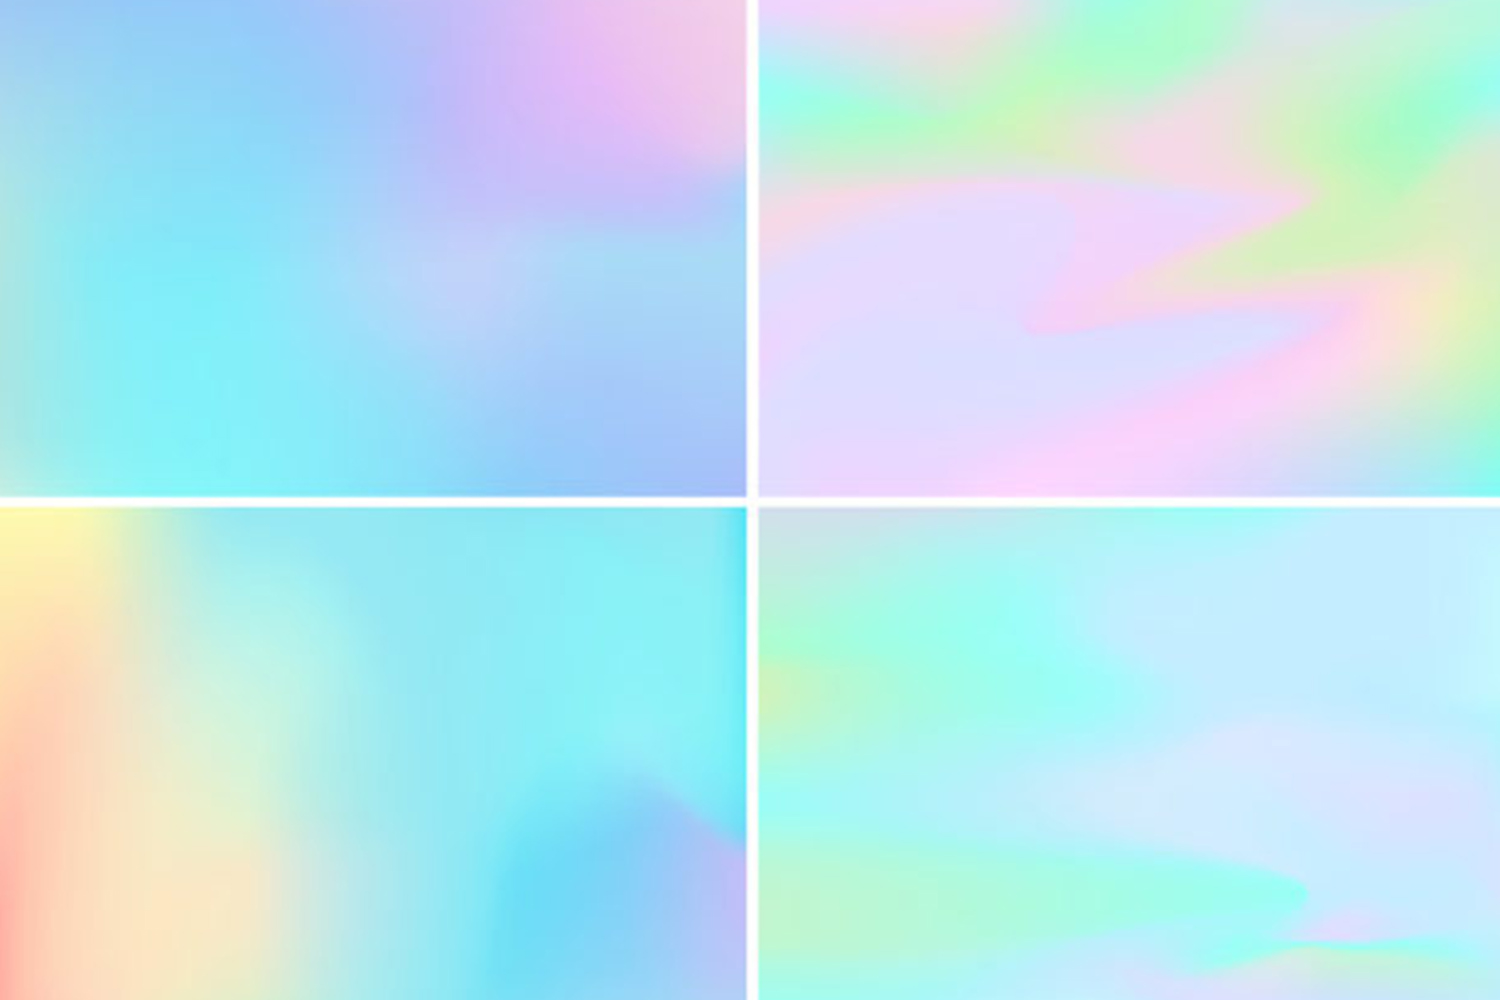 300+Photoshop Pack Of Beautiful Gradients